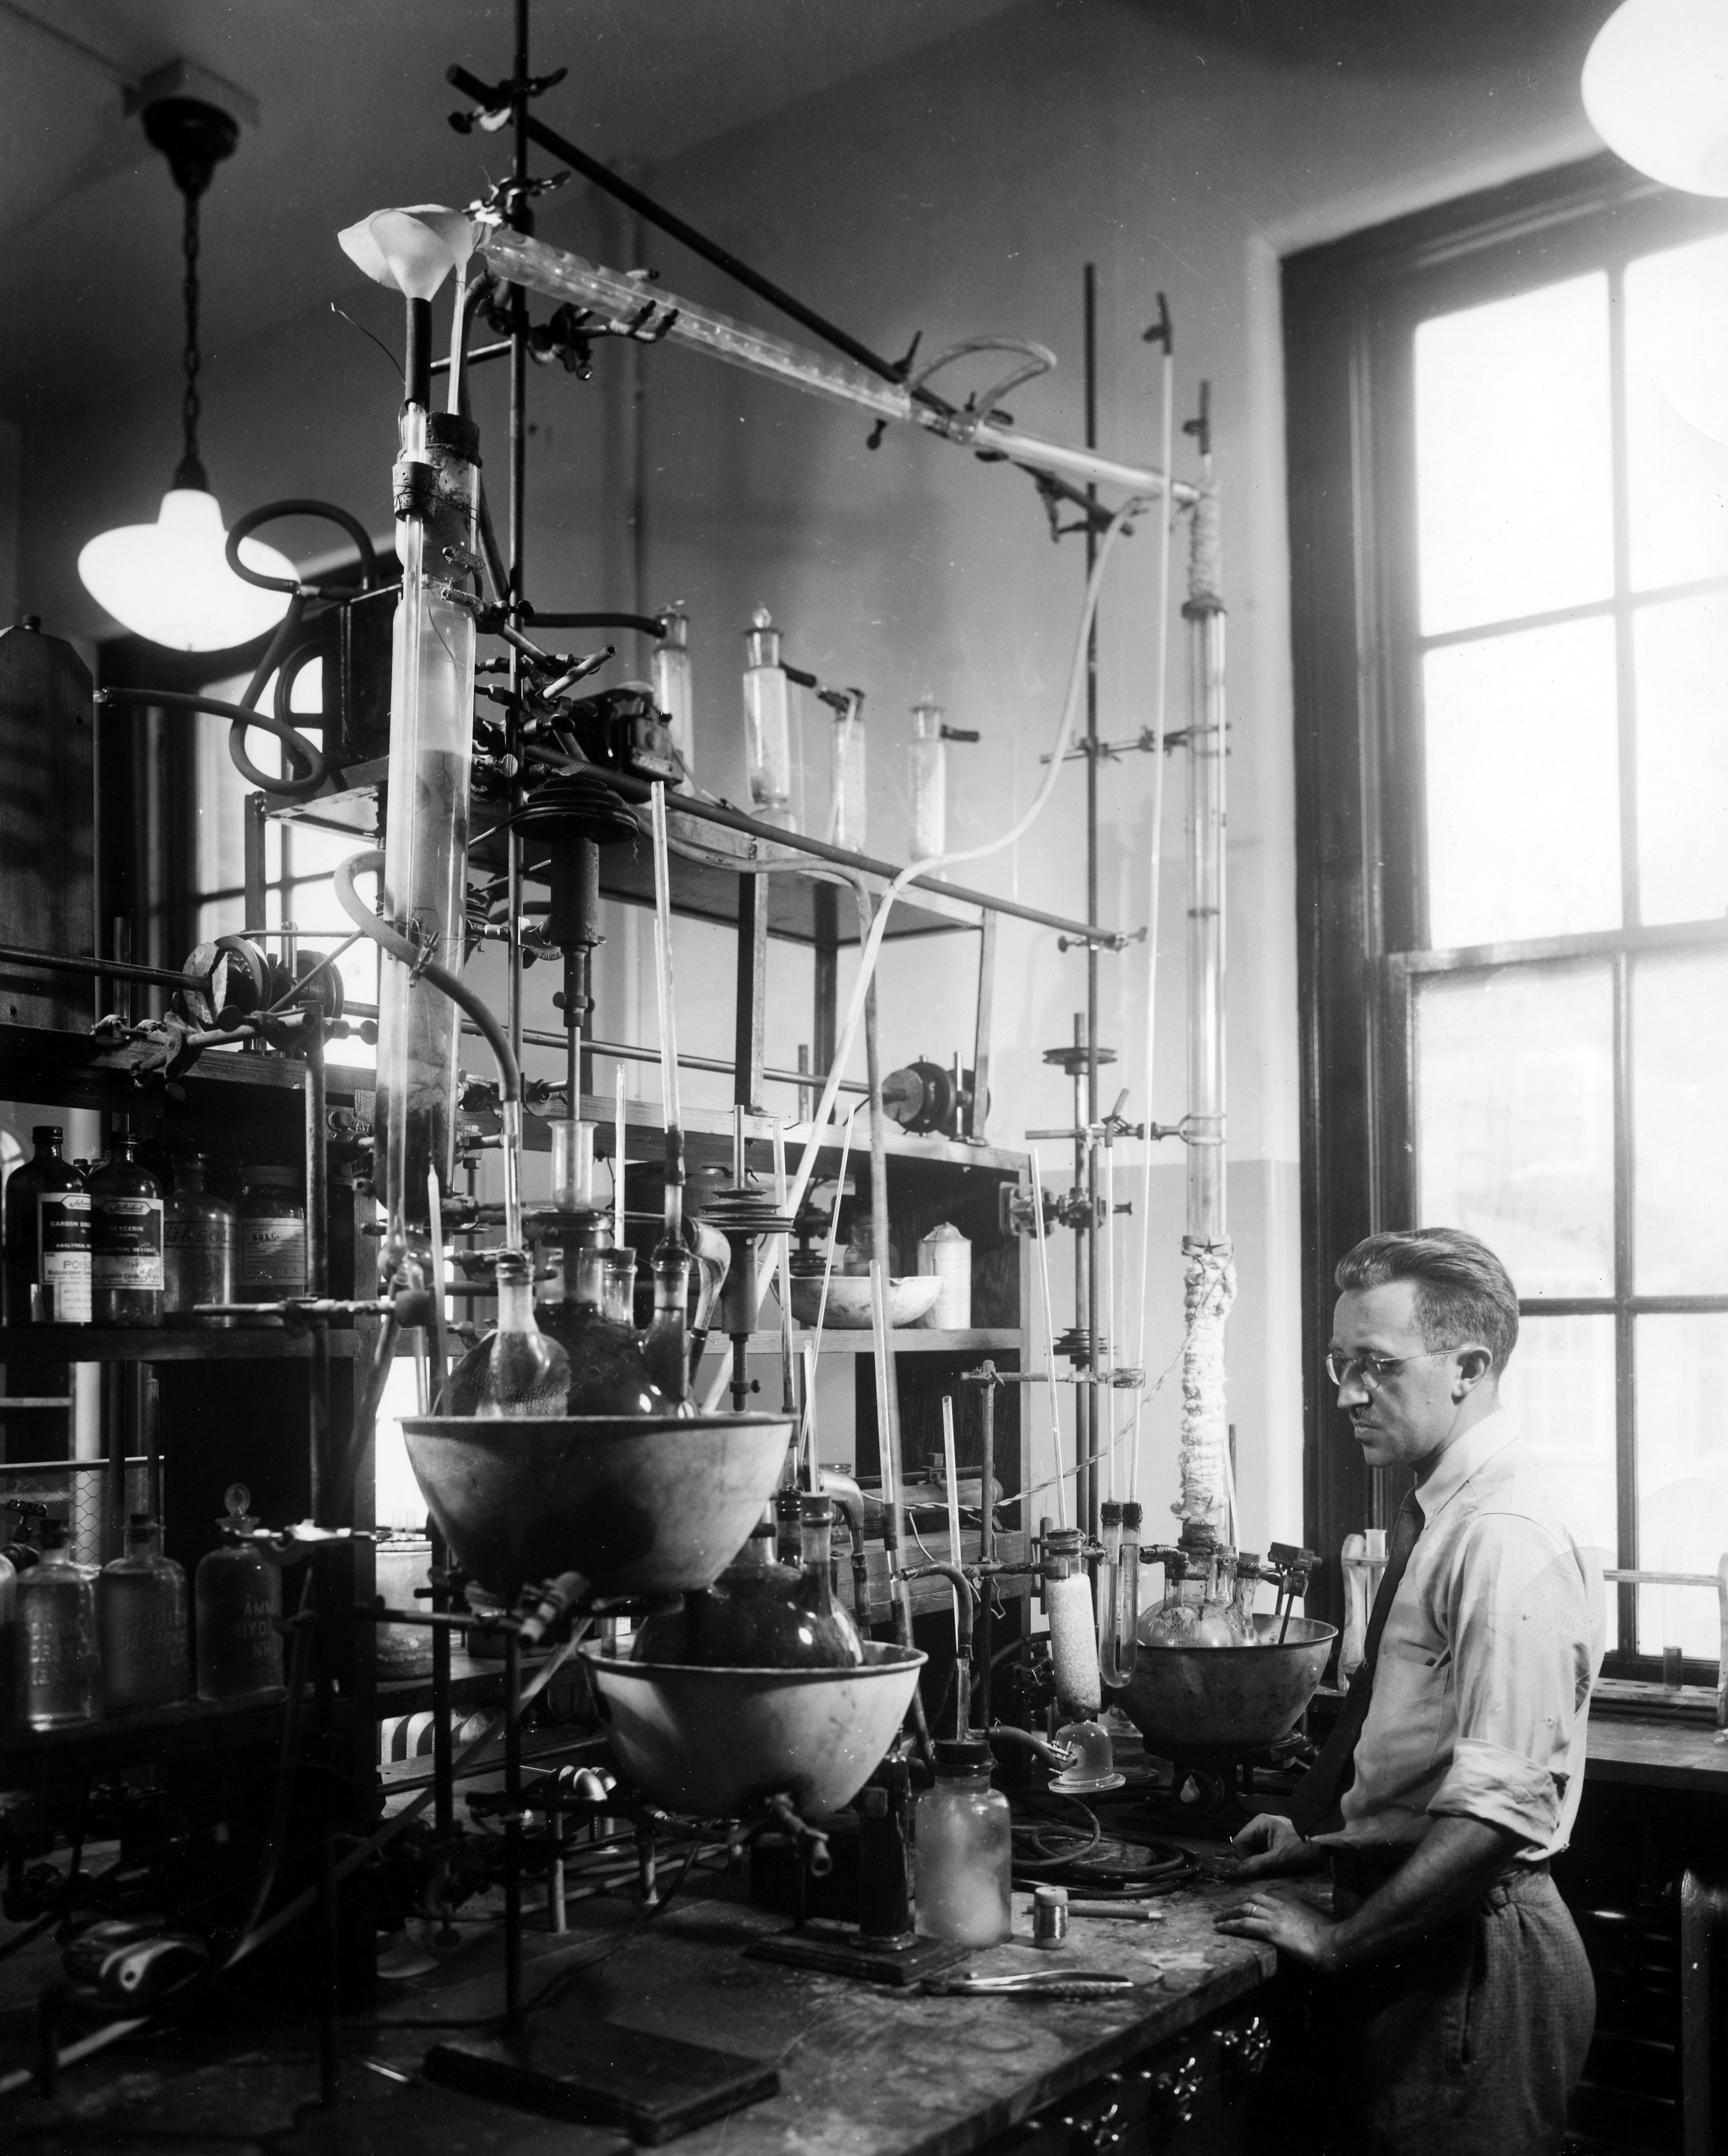 Black and white image of man standing in front of a large array of chemical laboratory apparatus.